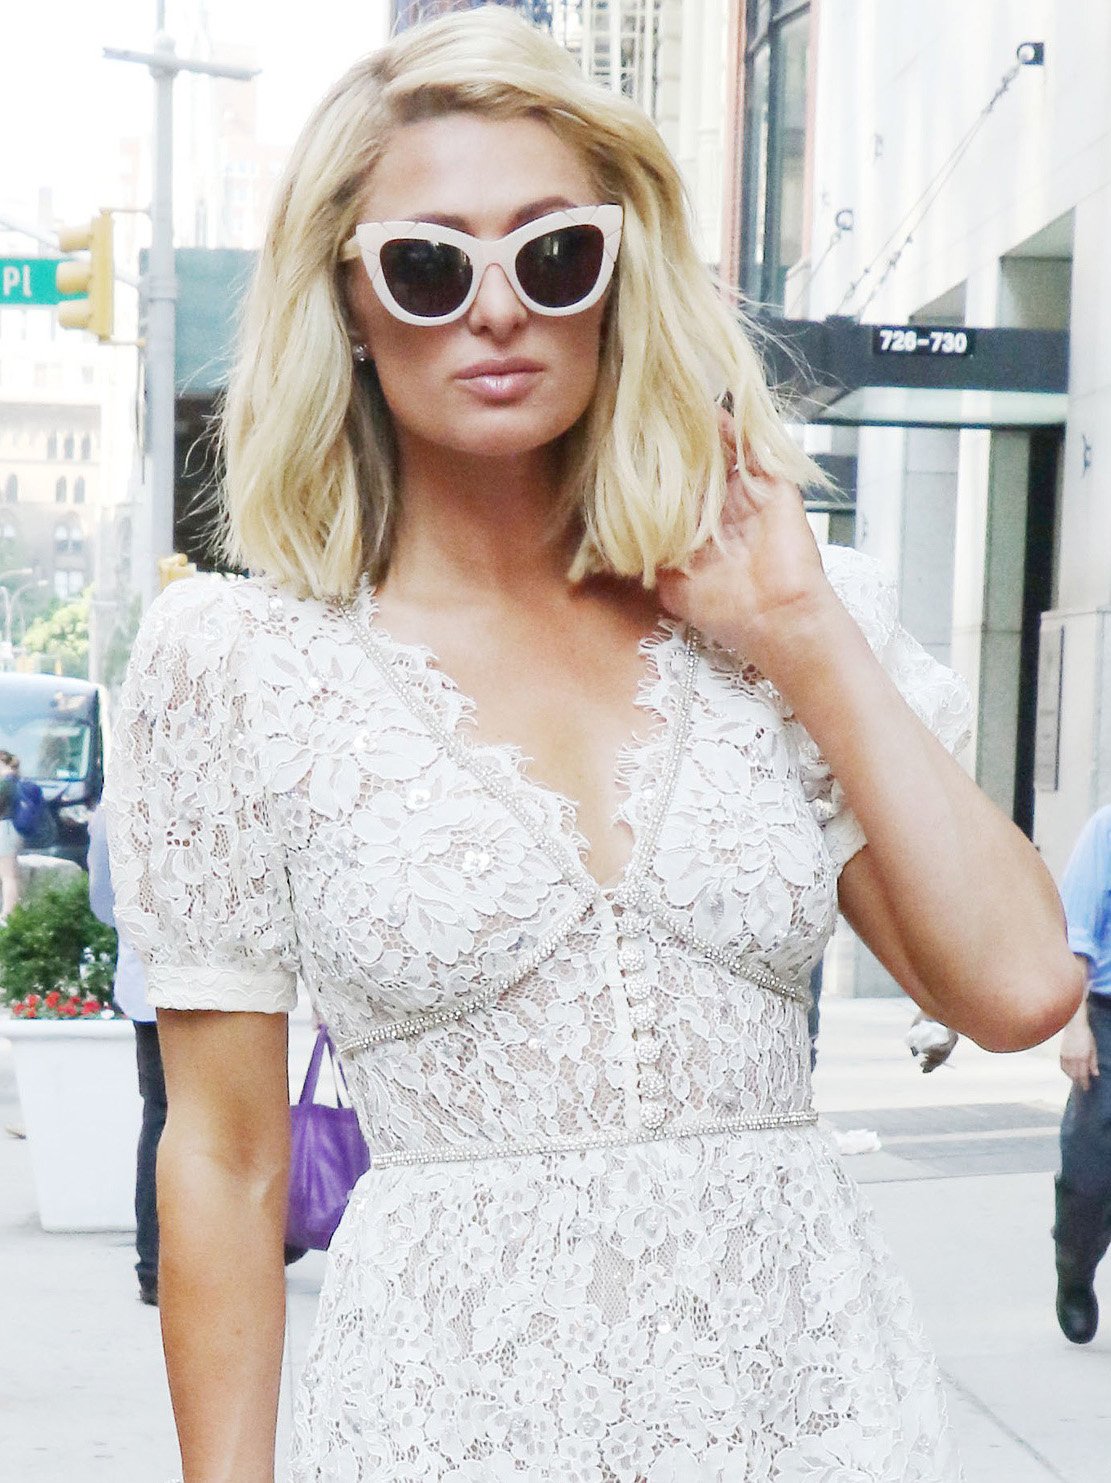 Nicky Hilton wears her bob-cut hair in tousled waves with nude lipstick and retro acetate cat-eye sunglasses